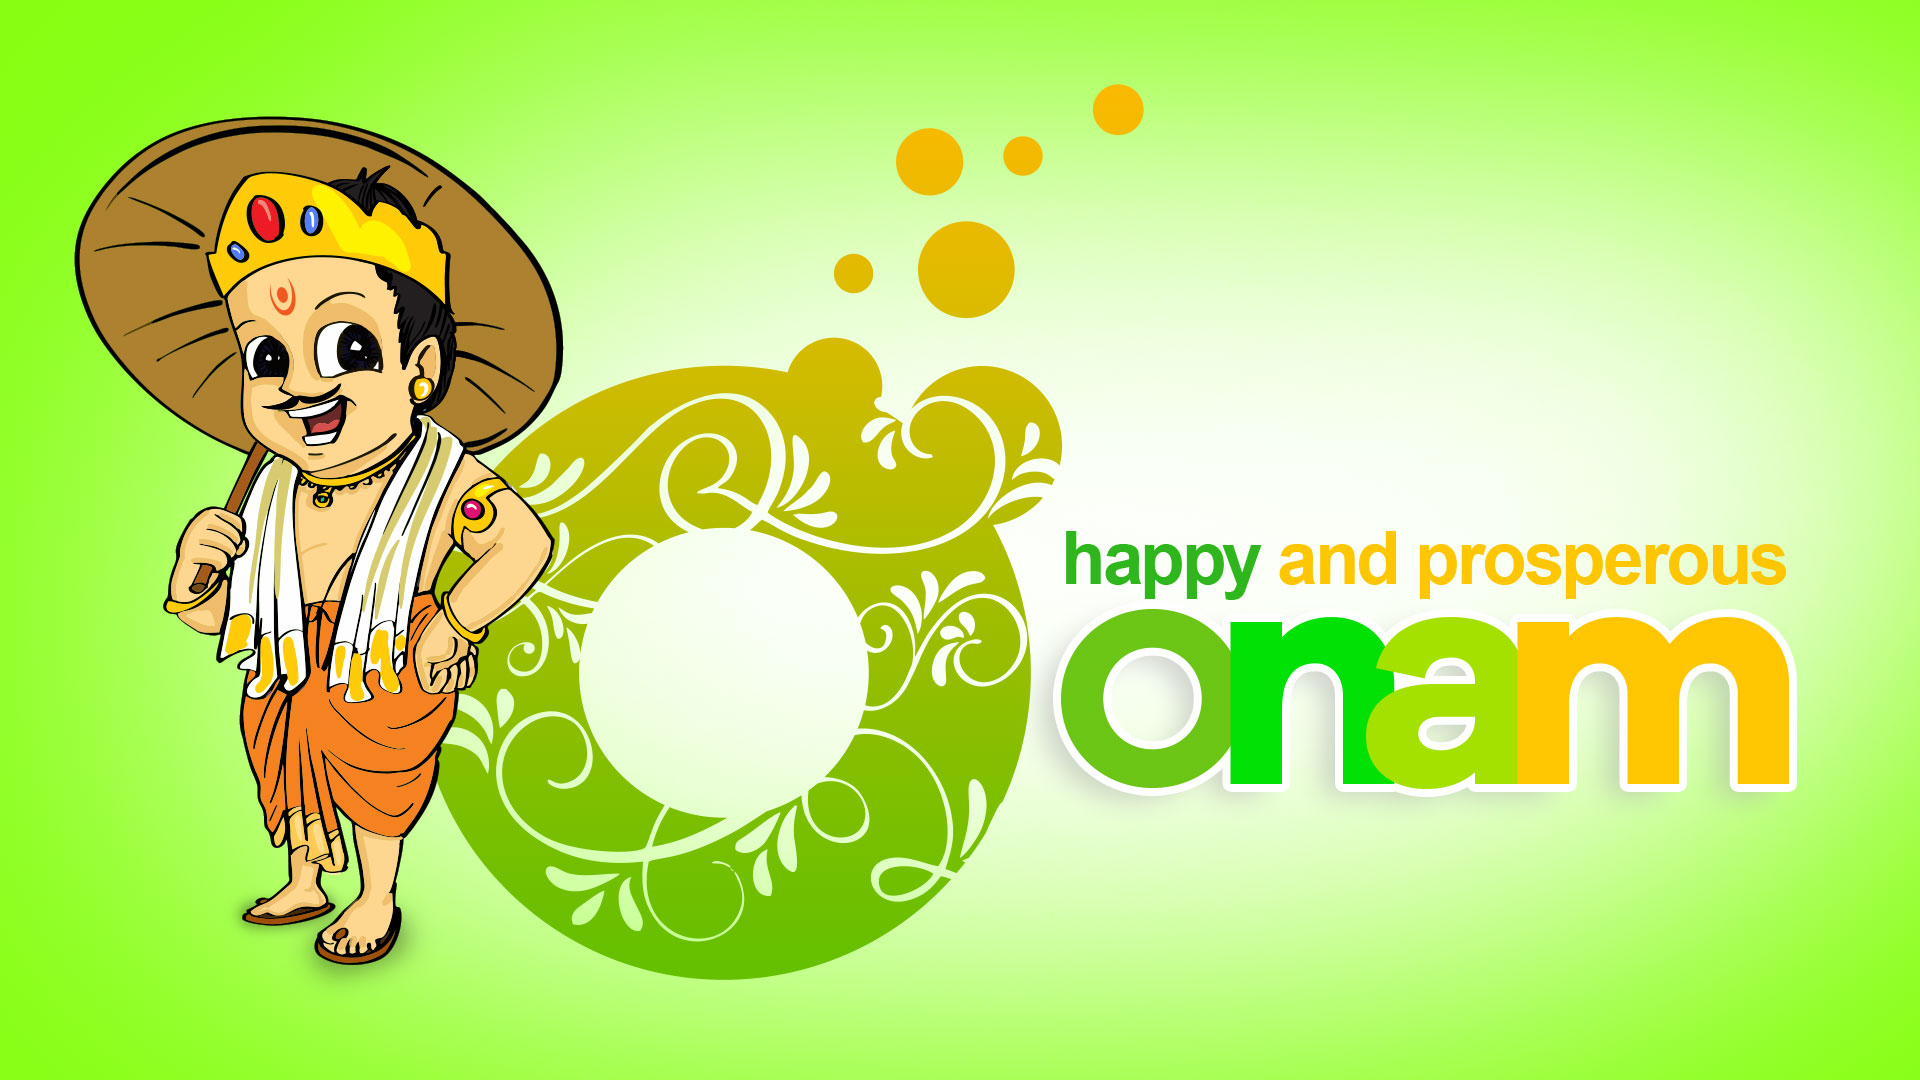 Happy Onam 2020 Images, HD Pictures, Ultra-HD Wallpapers, 4K Photos, And  High-Resolutions Photographs For WhatsApp Status, Messenger, Facebook,  Instagram, And Twitter